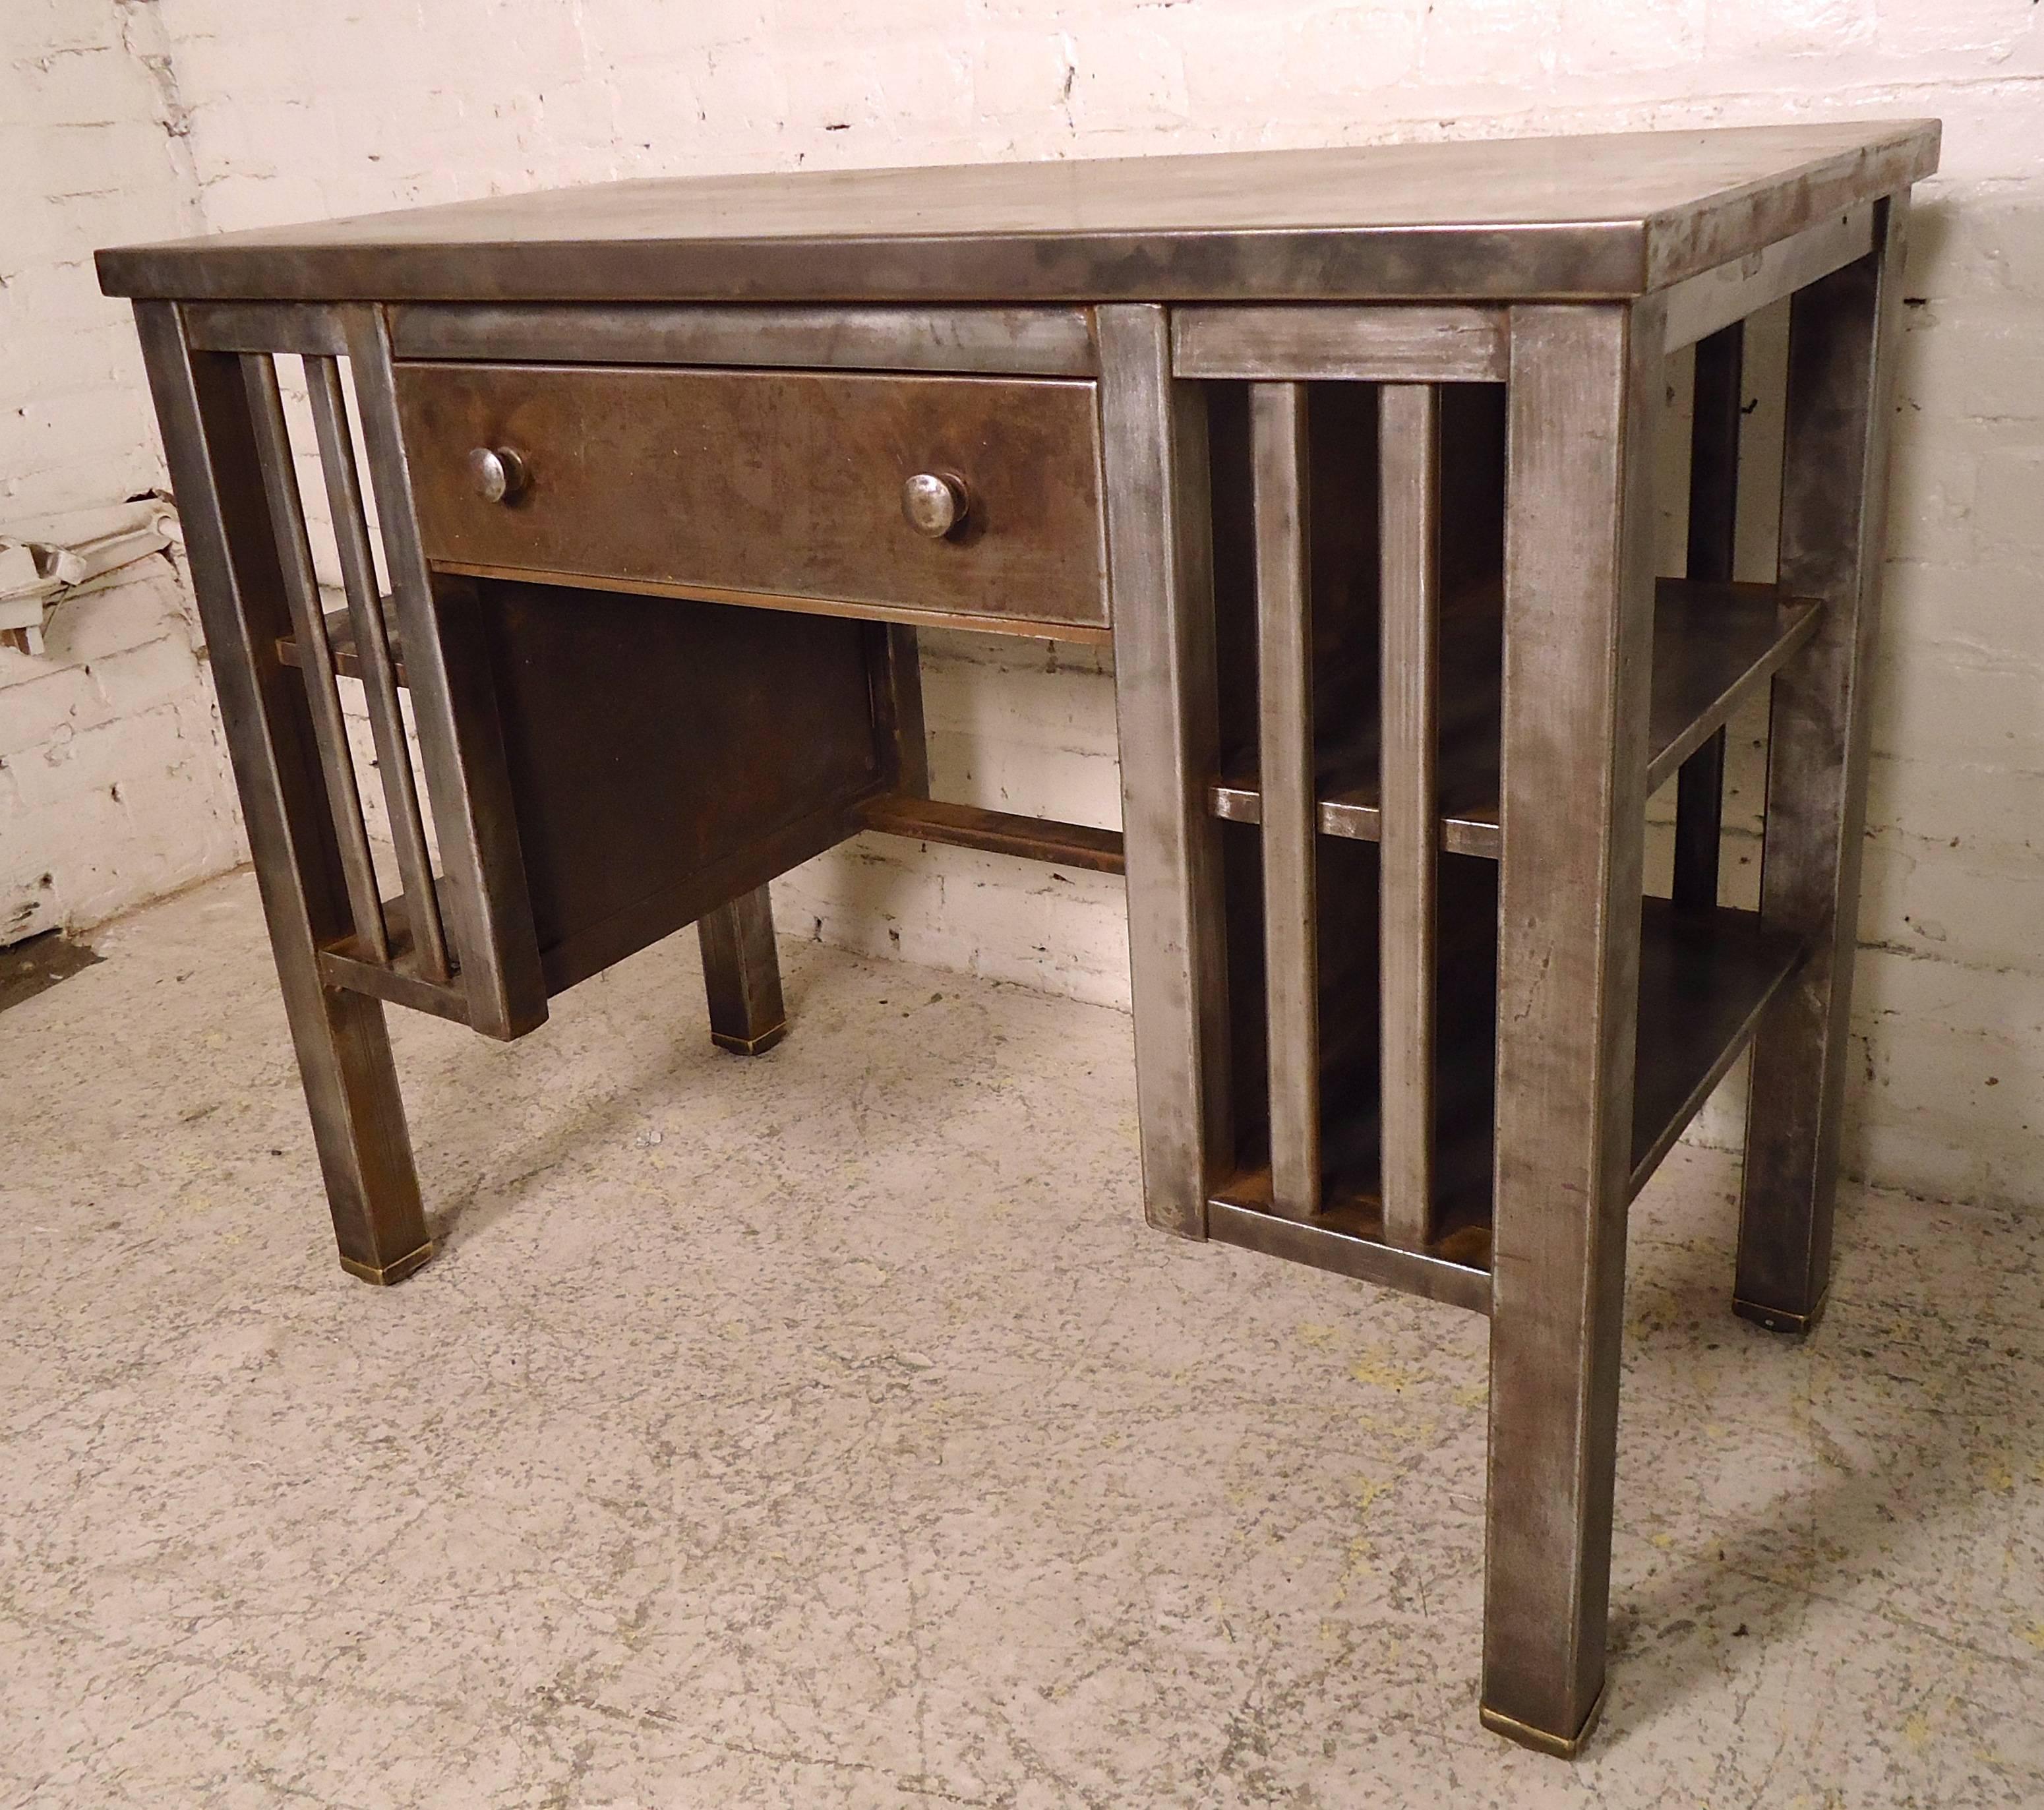 Unusual industrial flat top metal desk, features side shelving units. Completely refinished in a bare metal style.

(Please confirm item location - NY or NJ - with dealer).